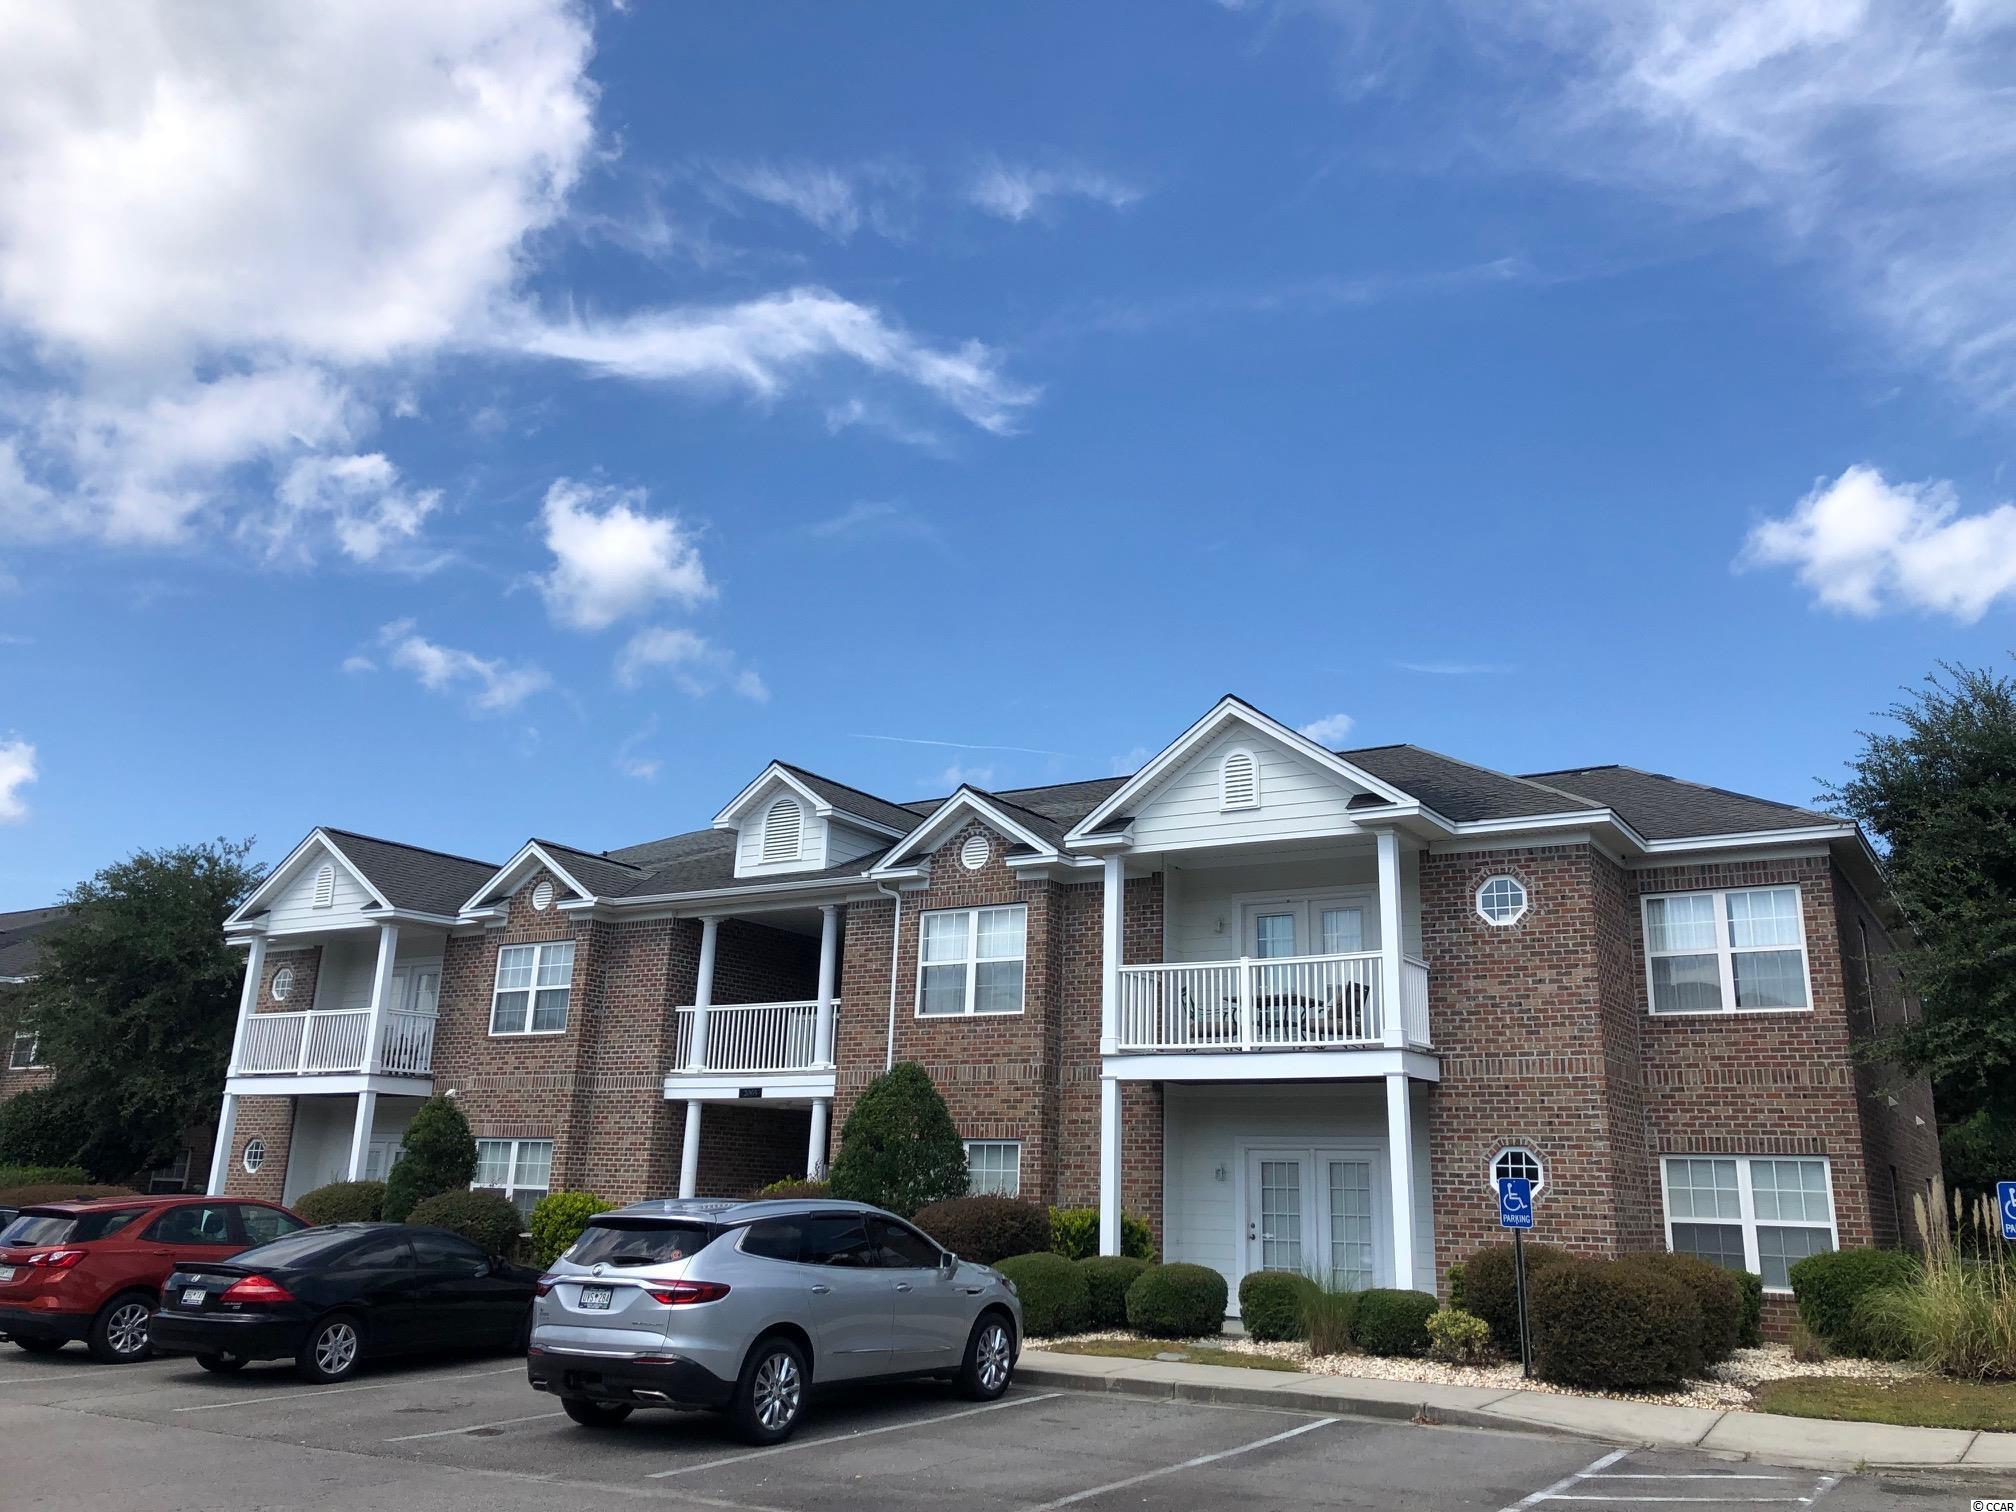 available now!  2 bedroom, 2 bath condo in the popular turnberry park carolina forest.  well maintained condo on the 2nd floor  which is the top floor as well.  balcony off of living room. both bedrooms have a walk in closet.  turnberry has a nice outdoor pool and playground. no pets allowed